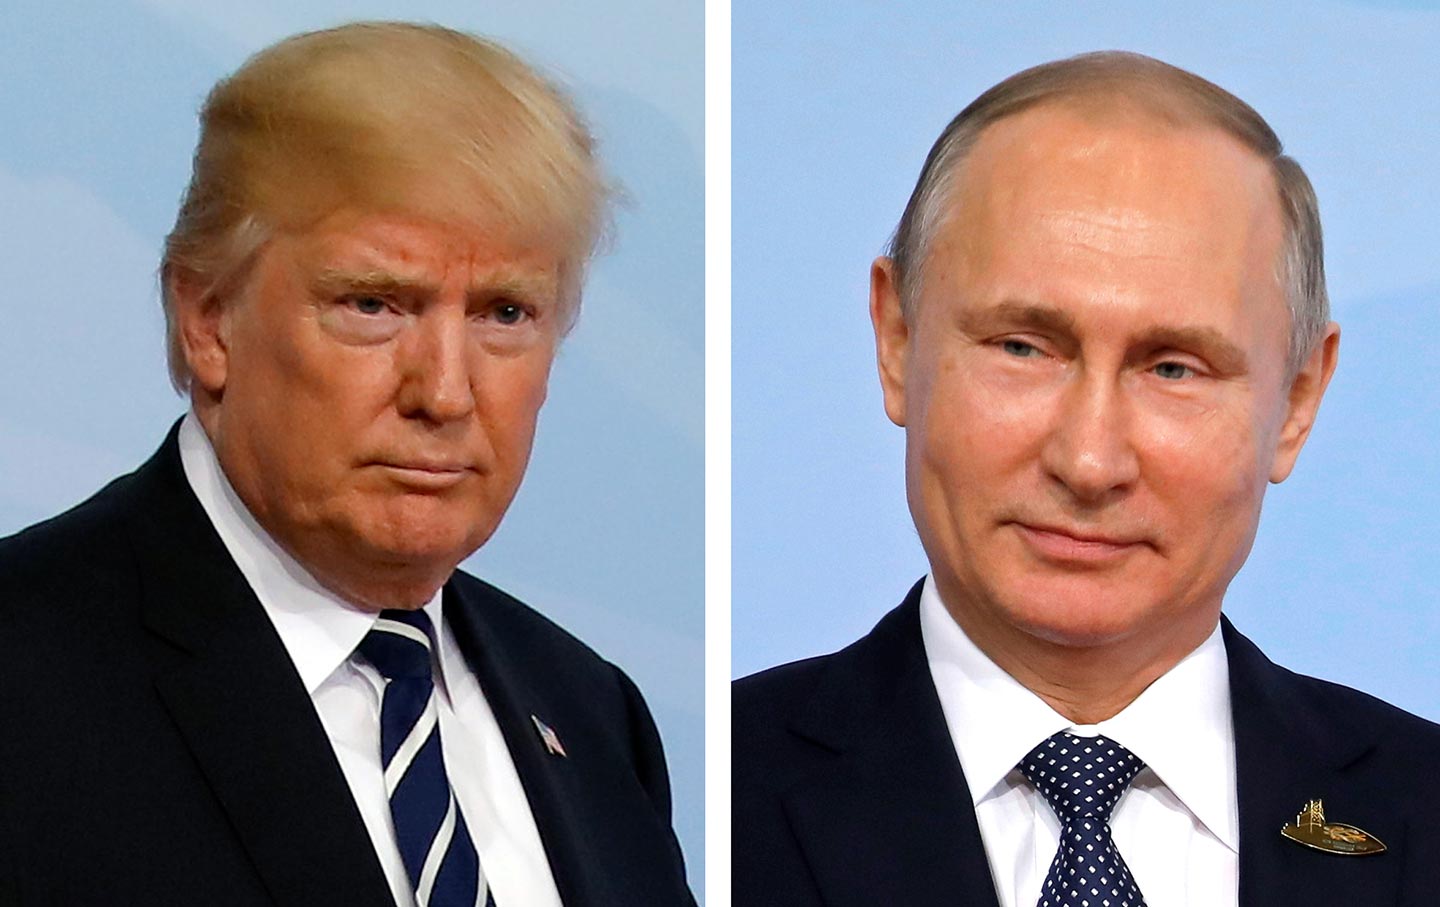 Trump and Putin side-by-side